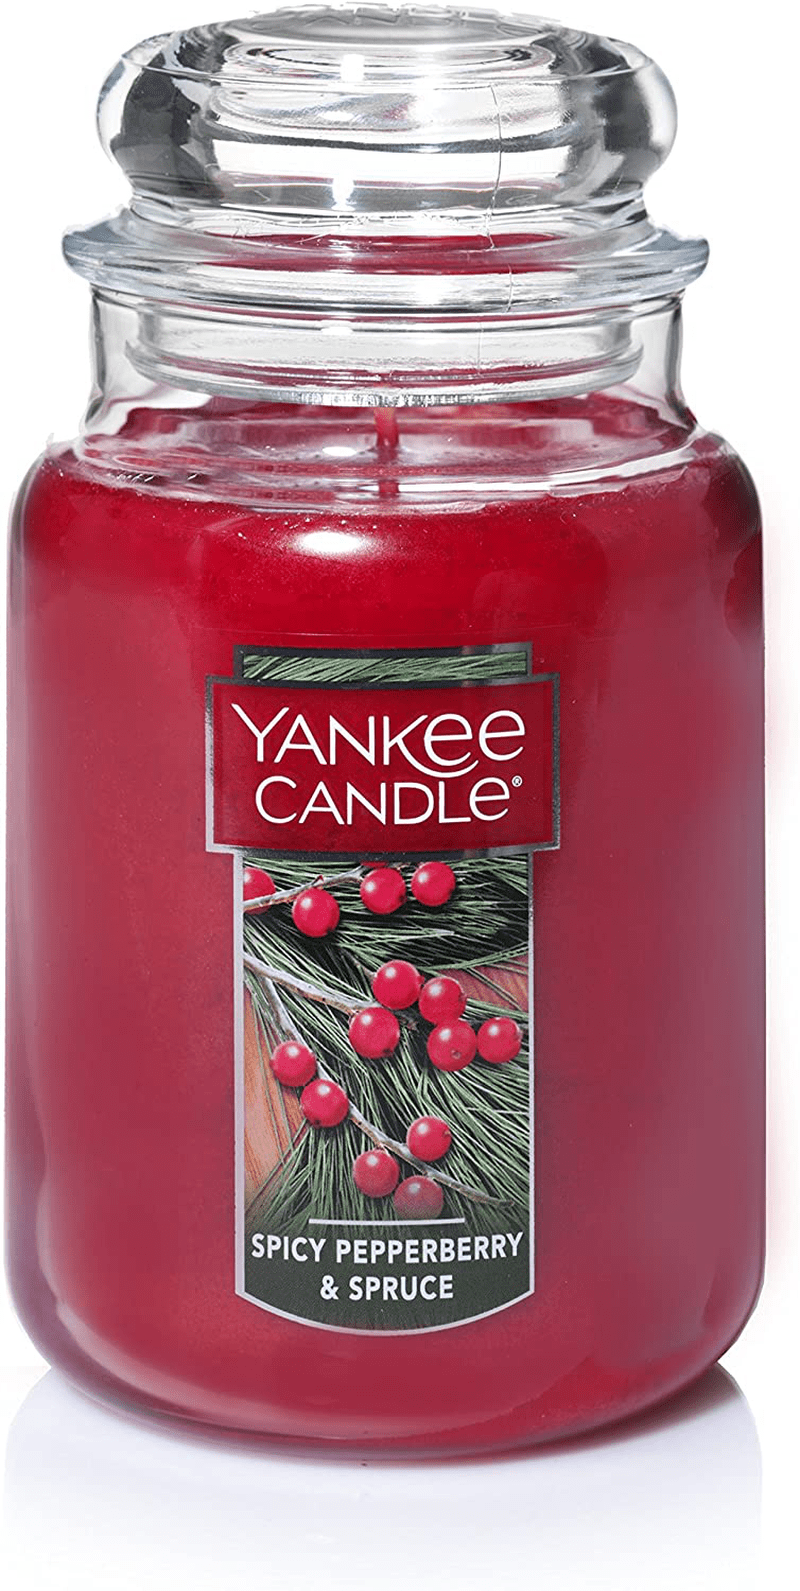 Yankee Candle Large Jar Candle Home Sweet Home Home & Garden > Decor > Home Fragrances > Candles Yankee Candle Spicy Pepperberry & Spruce Large Jar 